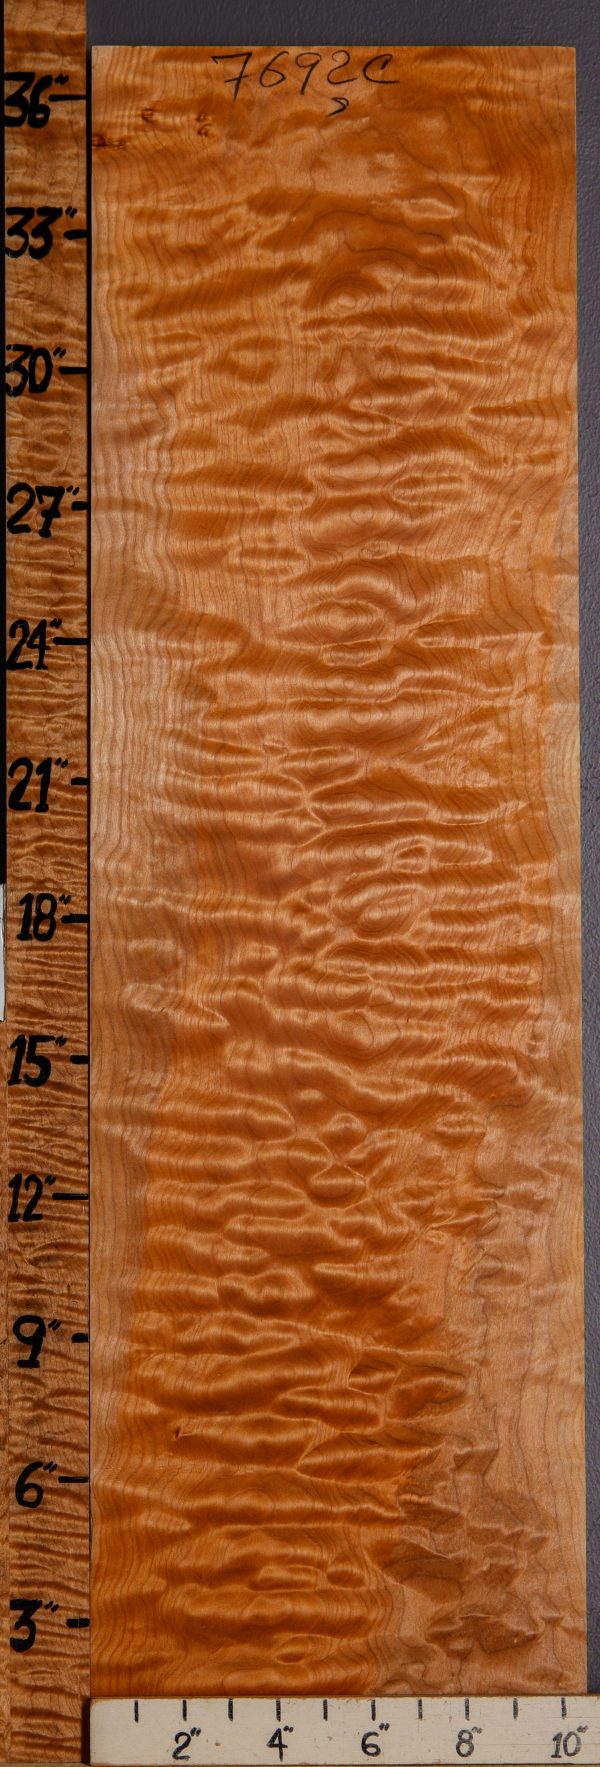 Musical Tubelar Quilted Maple Lumber 10"1/2 X 36" X 4/4 (NWT-7692C)